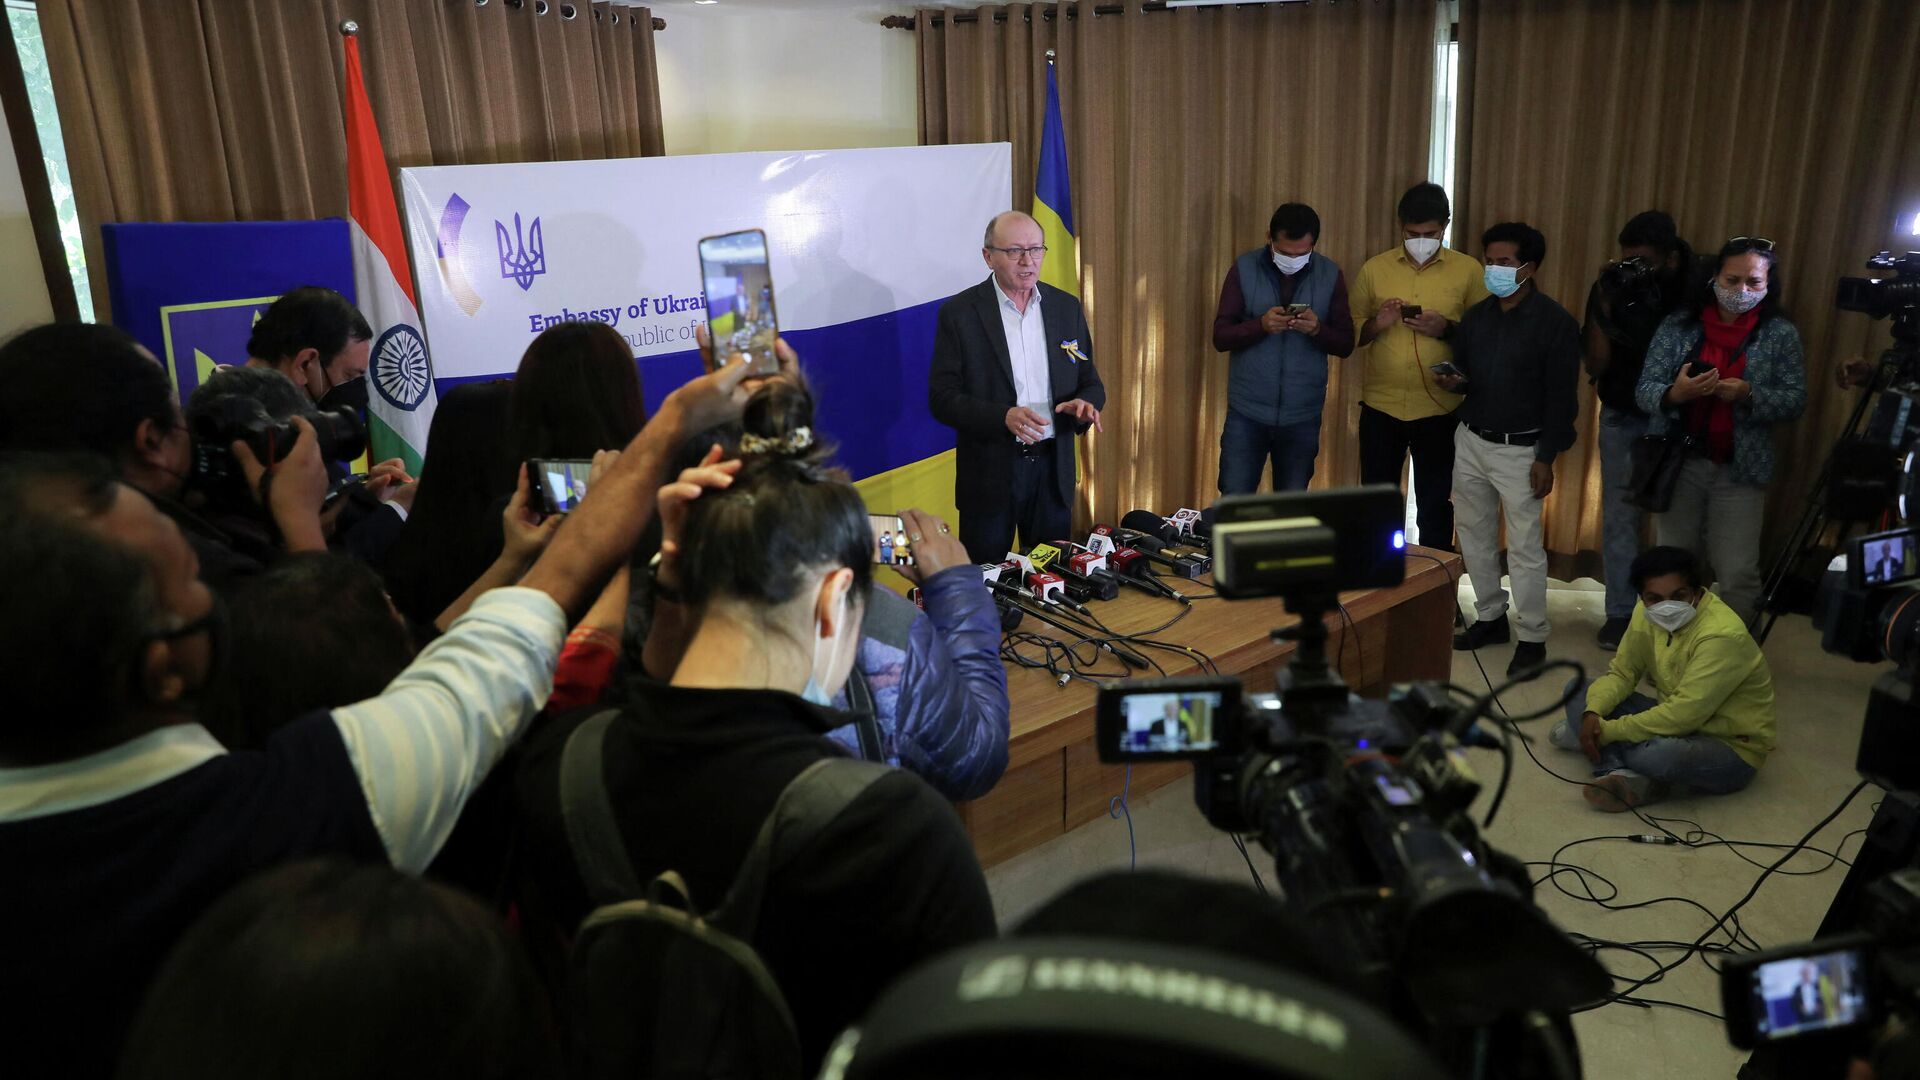 Ukraine's Ambassador to India, Igor Polikha speaks during a news conference, as Russia's special military operation in Ukraine continues, at the Embassy of Ukraine in New Delhi, India, February 28, 2022. - Sputnik International, 1920, 02.03.2022